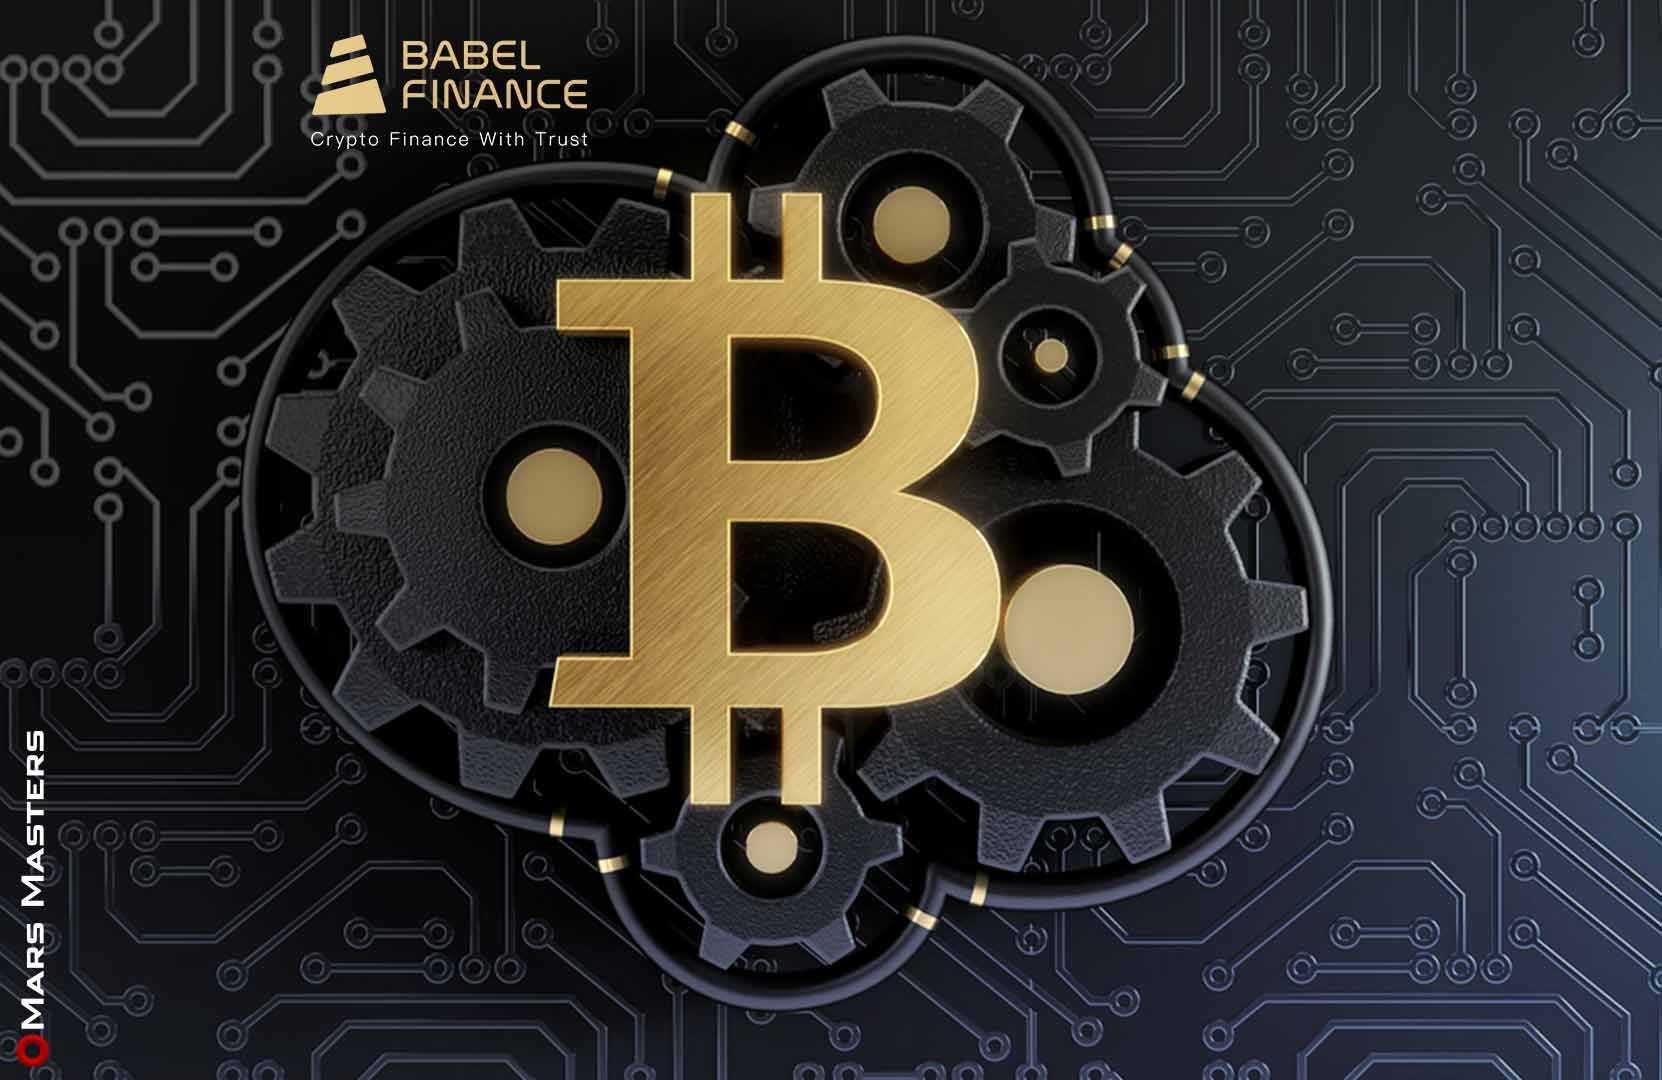 Babel Finance Is Letting Crypto Mining Firms Use Machines as Loan Collateral